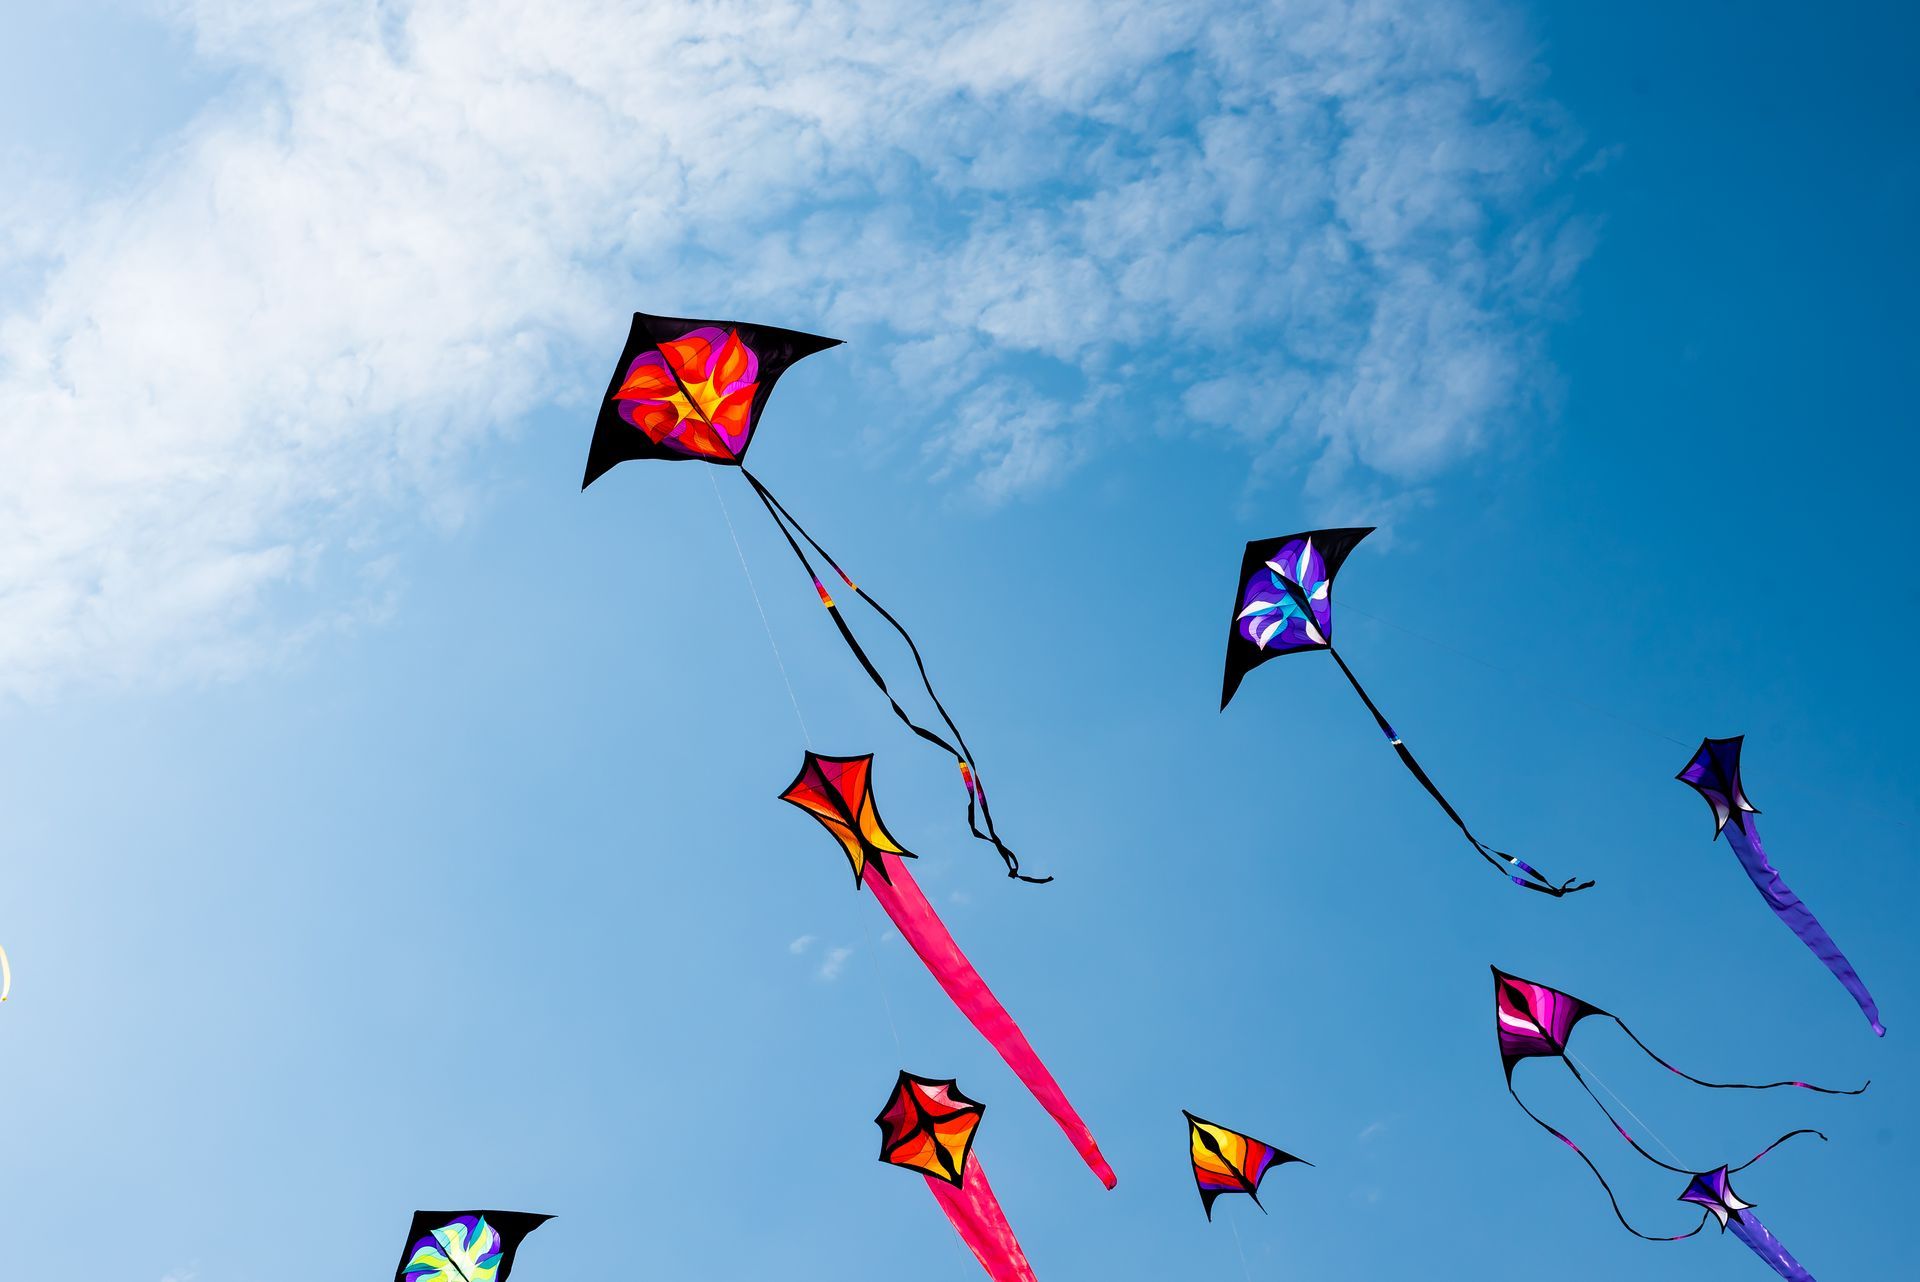 Colourful kites flying high up against a blue sky